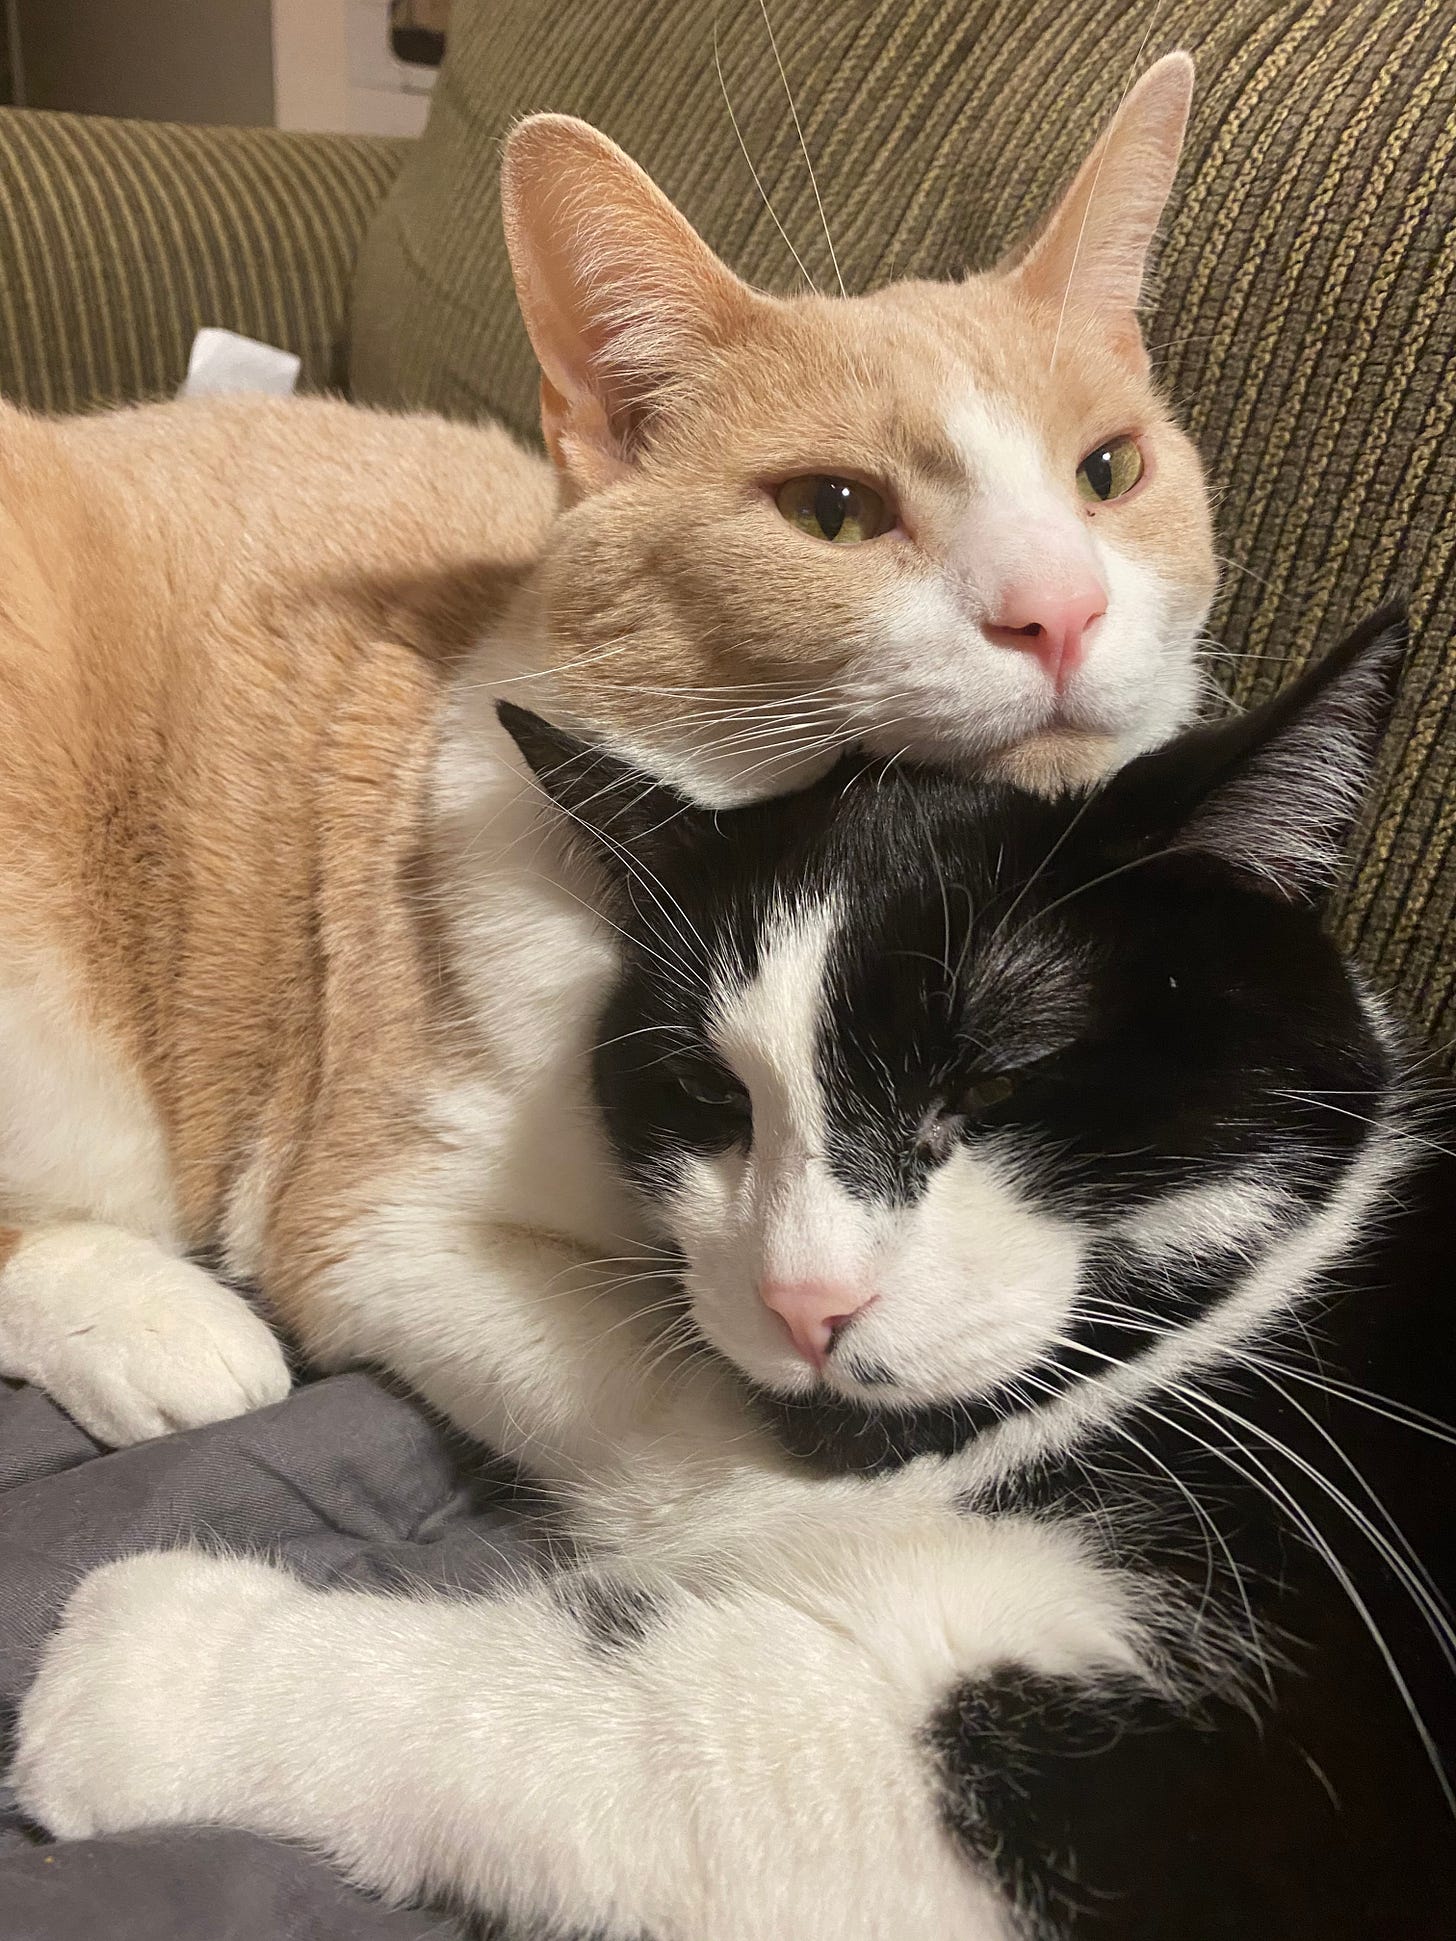 My cats, Dexter (orange and white cat) and Alfie (black and white cat) snuggling each other